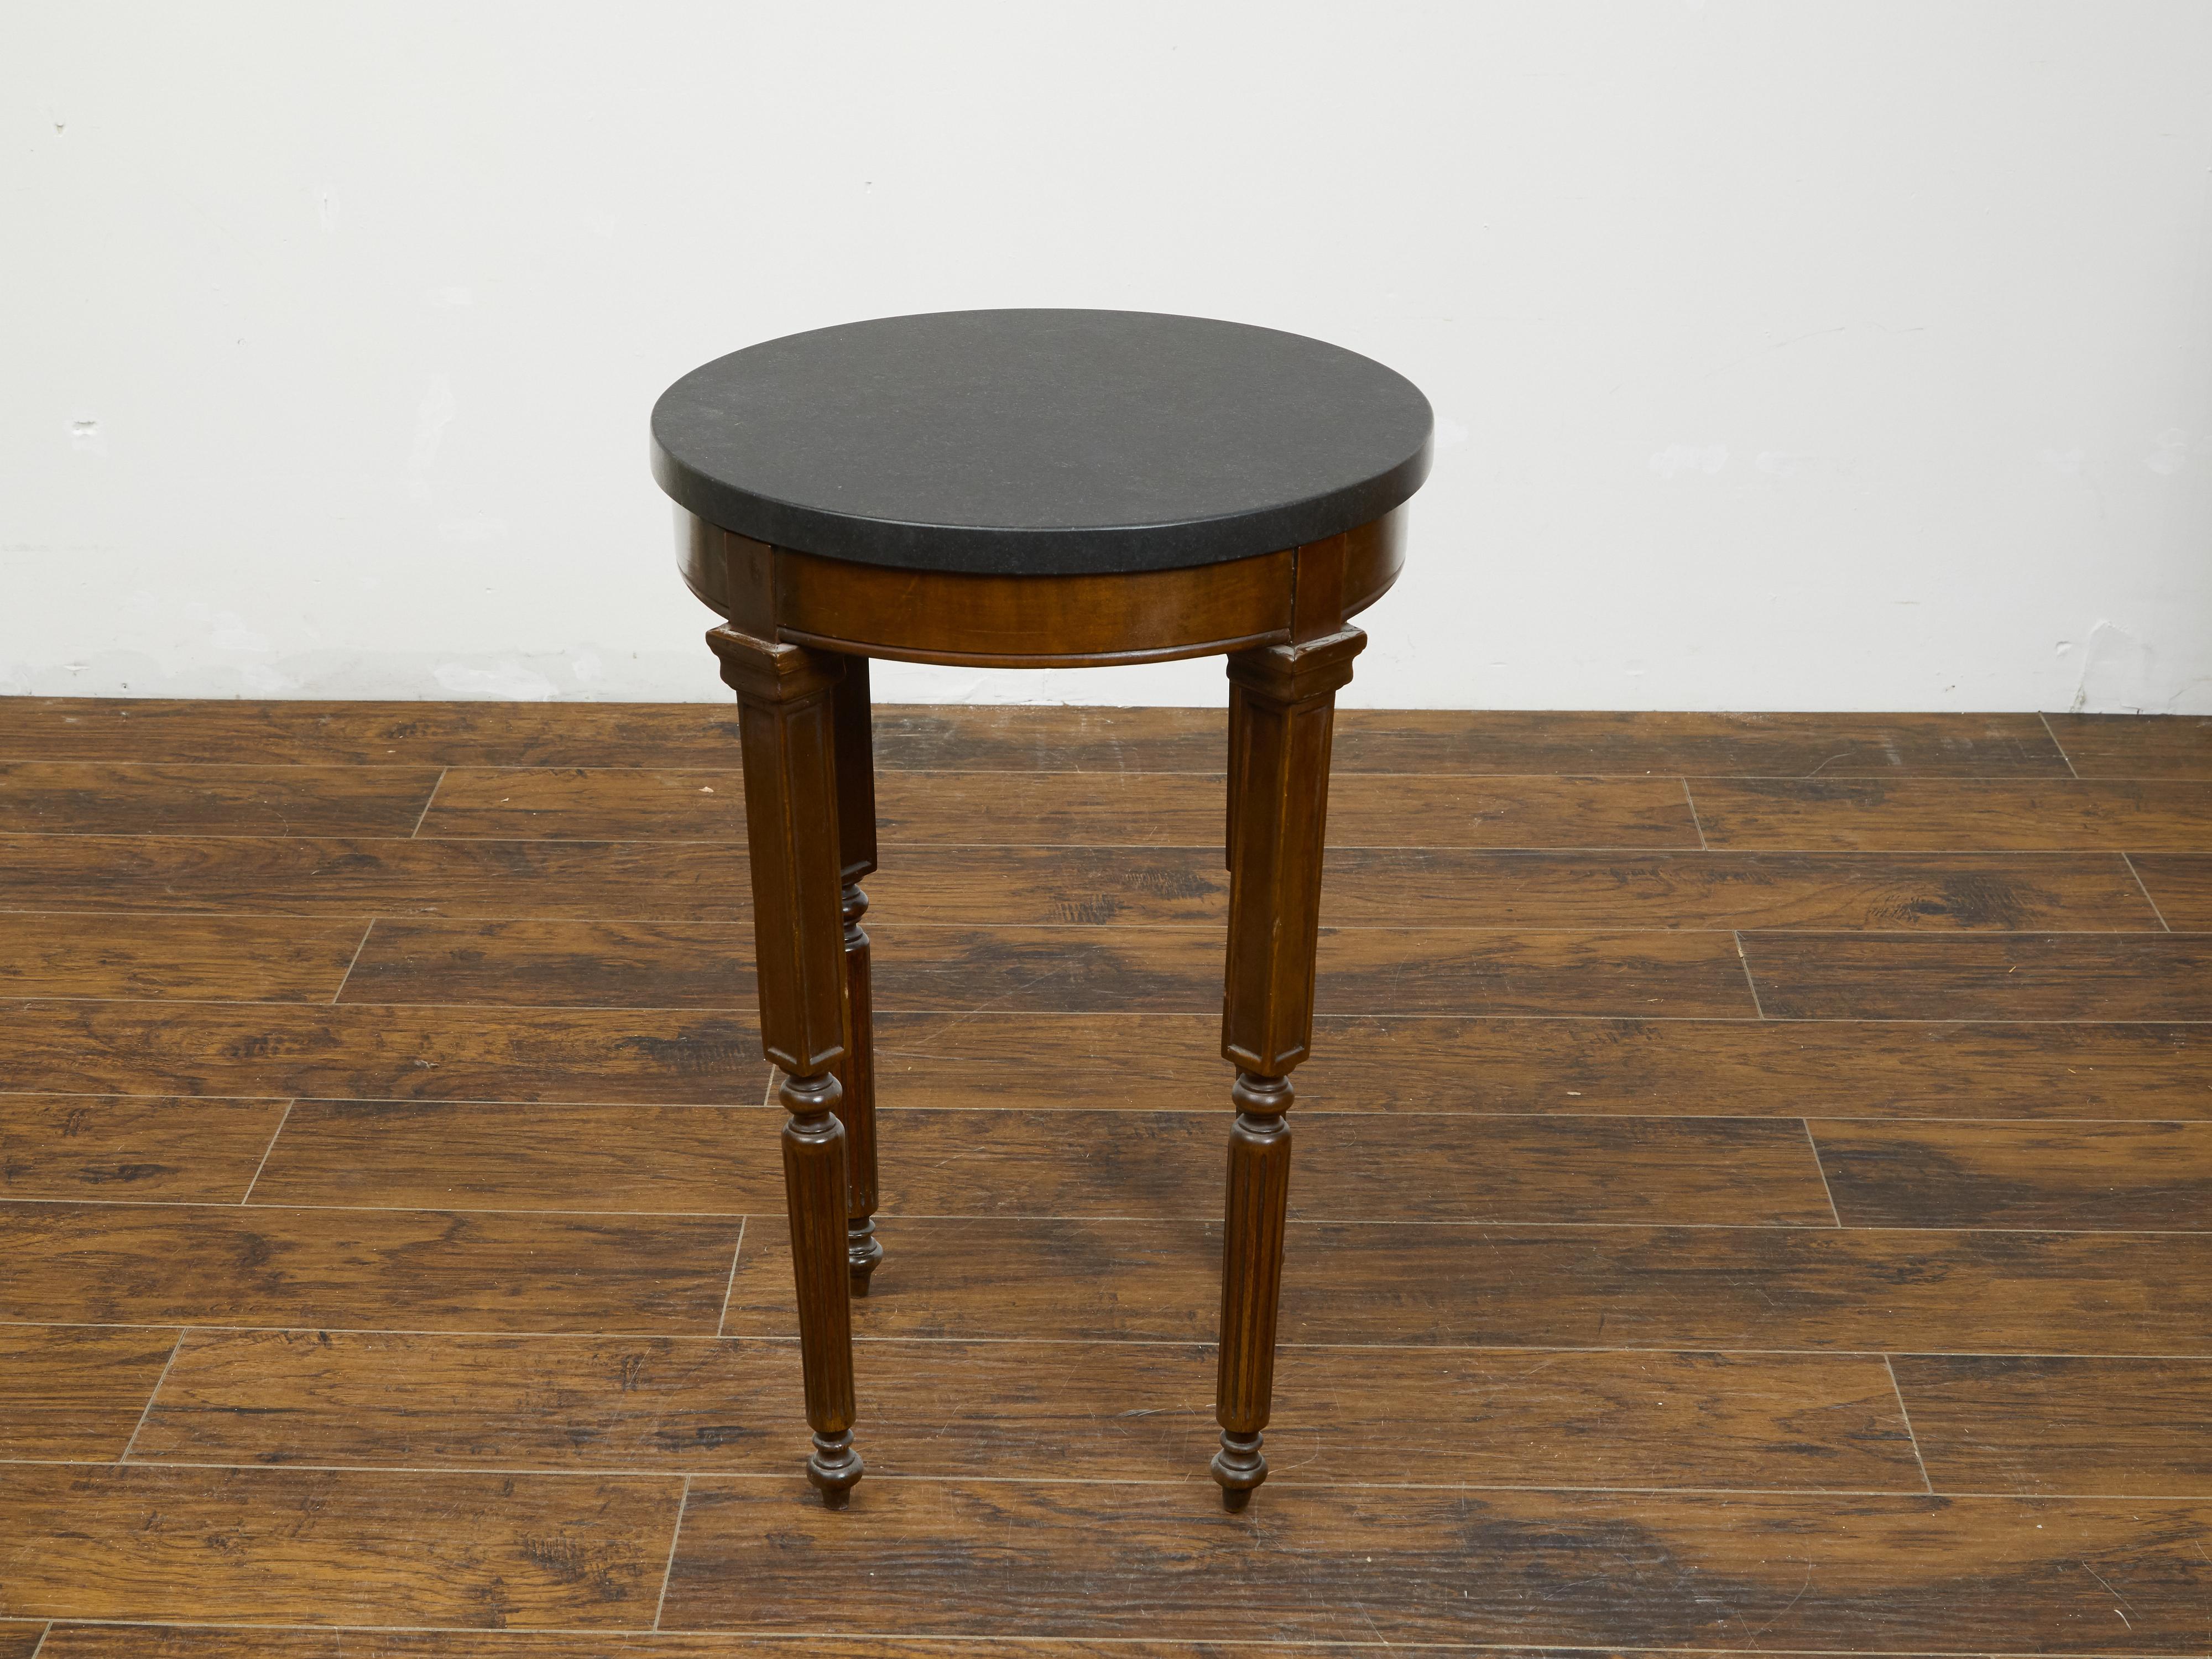 French 19th Century Wooden Guéridon Table with Circular Black Marble Top For Sale 1